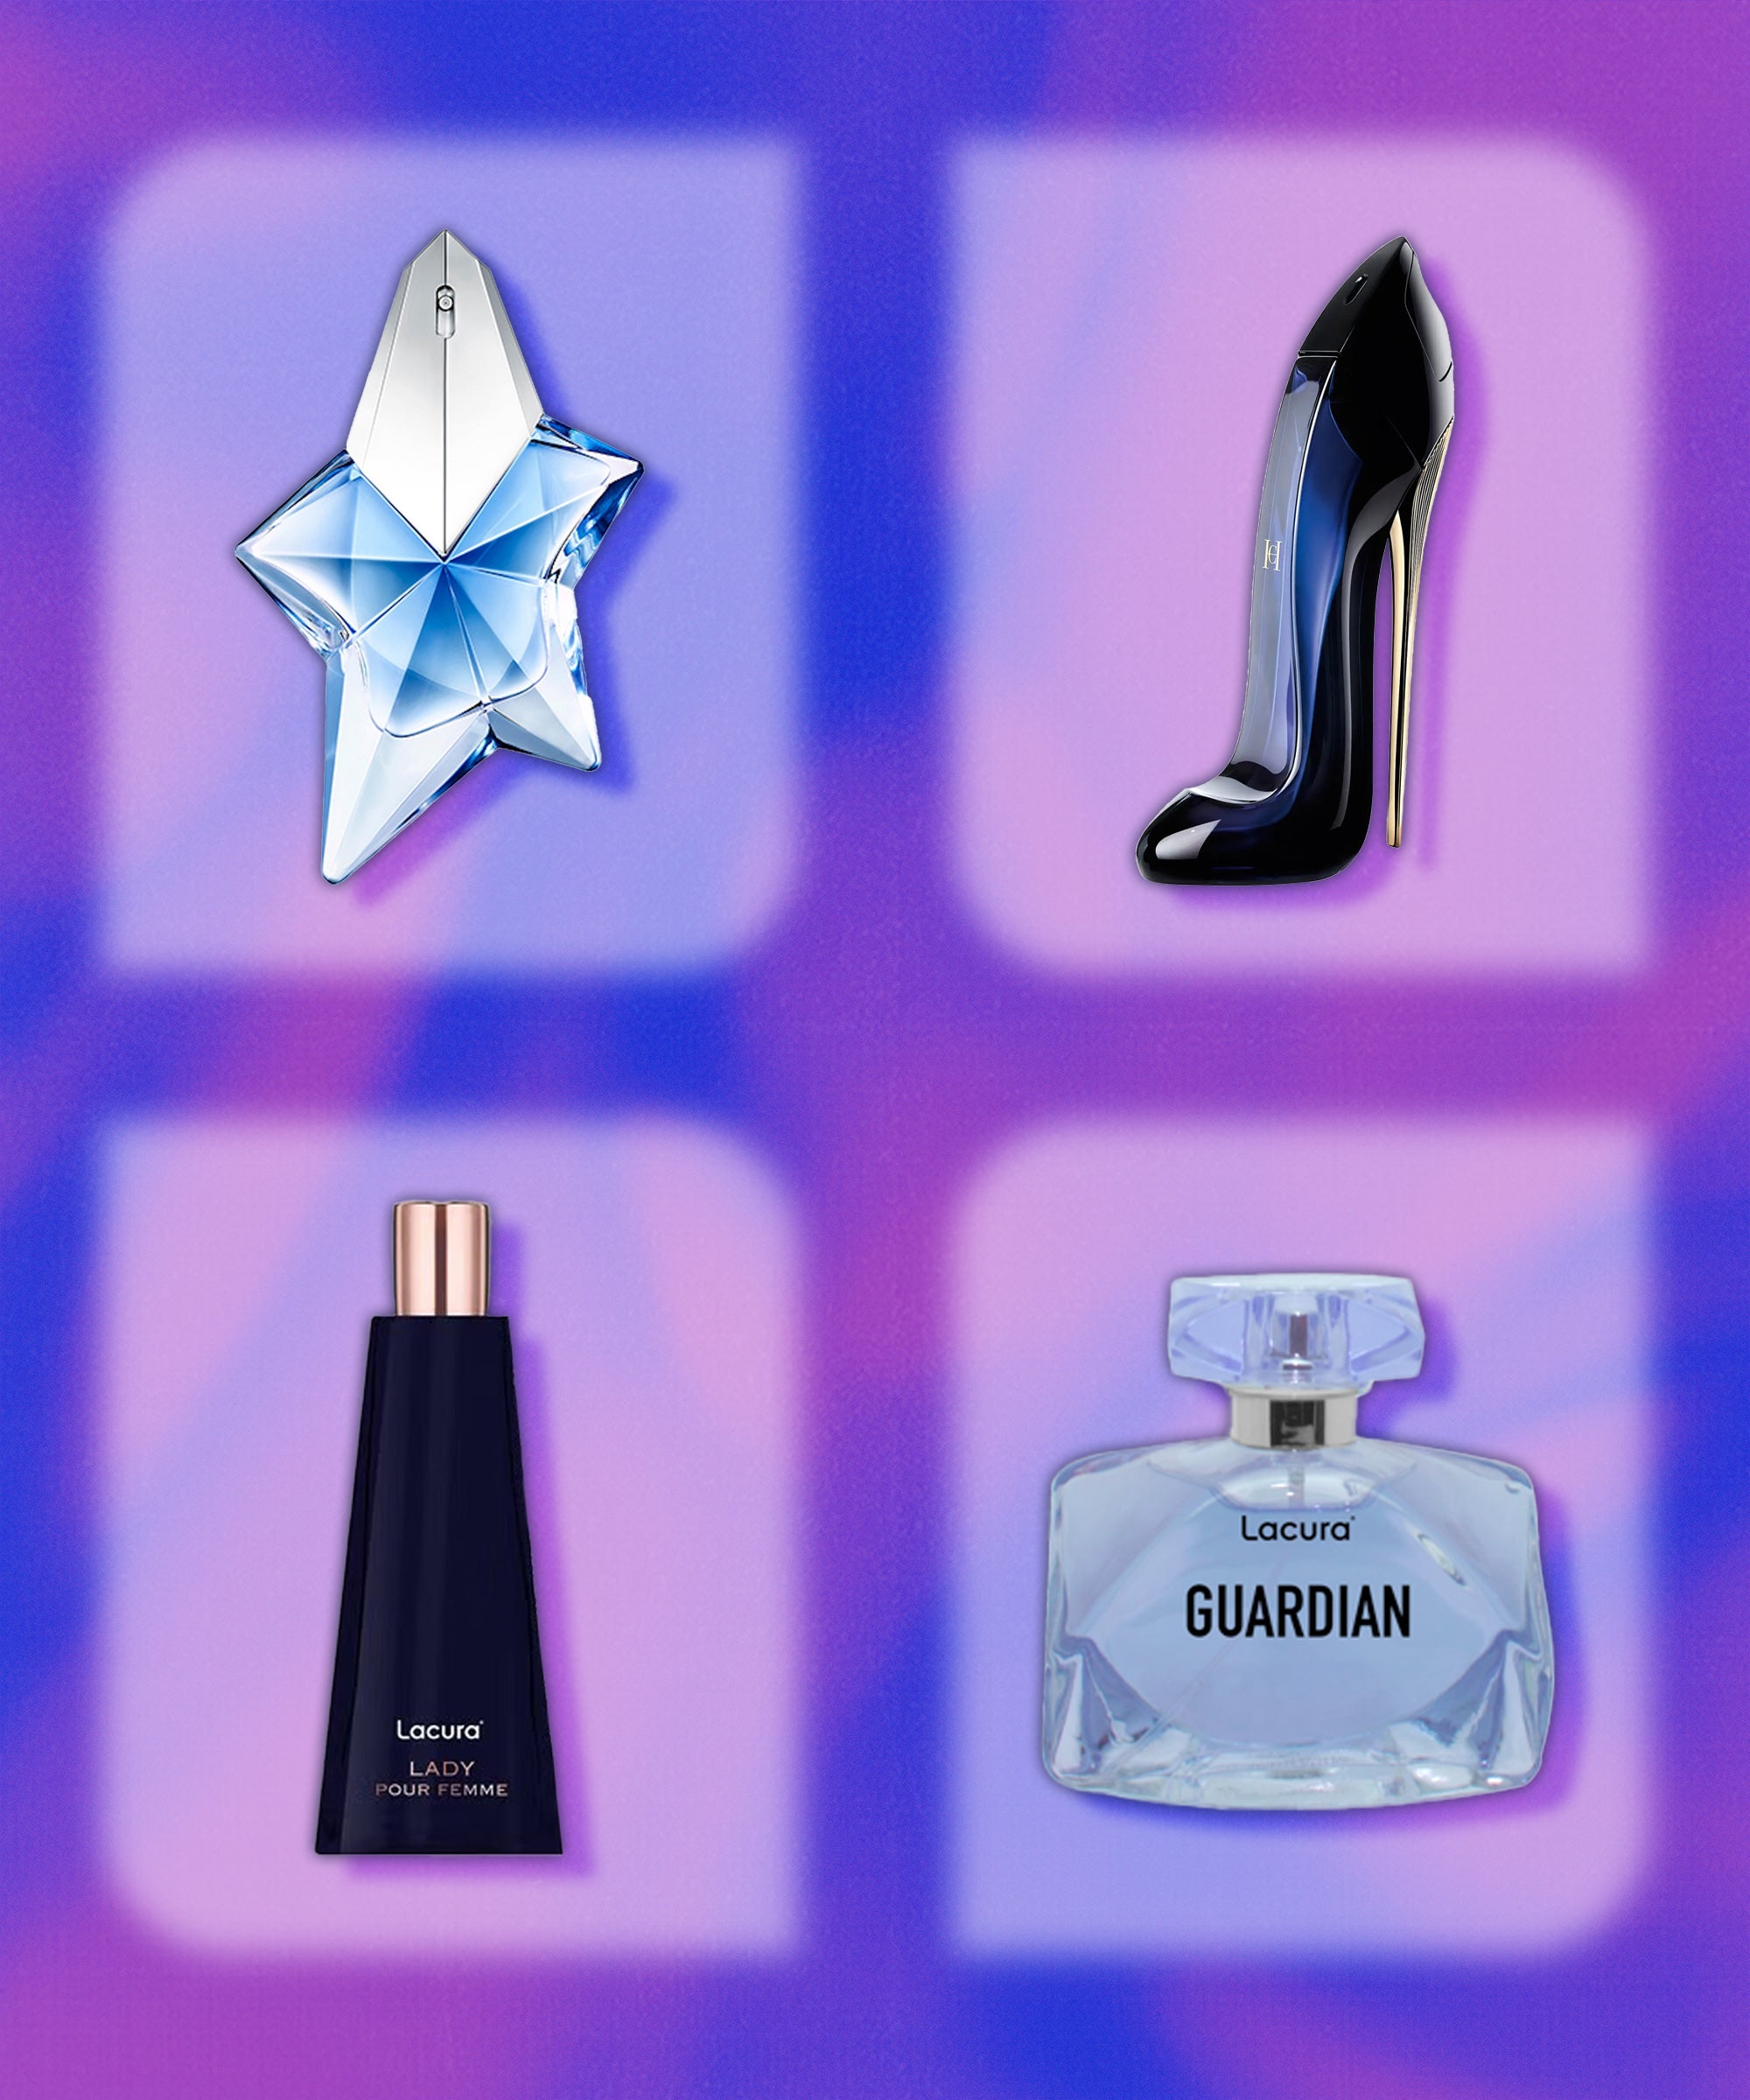 does anyone ever tried these dupes from fragrance world? are they